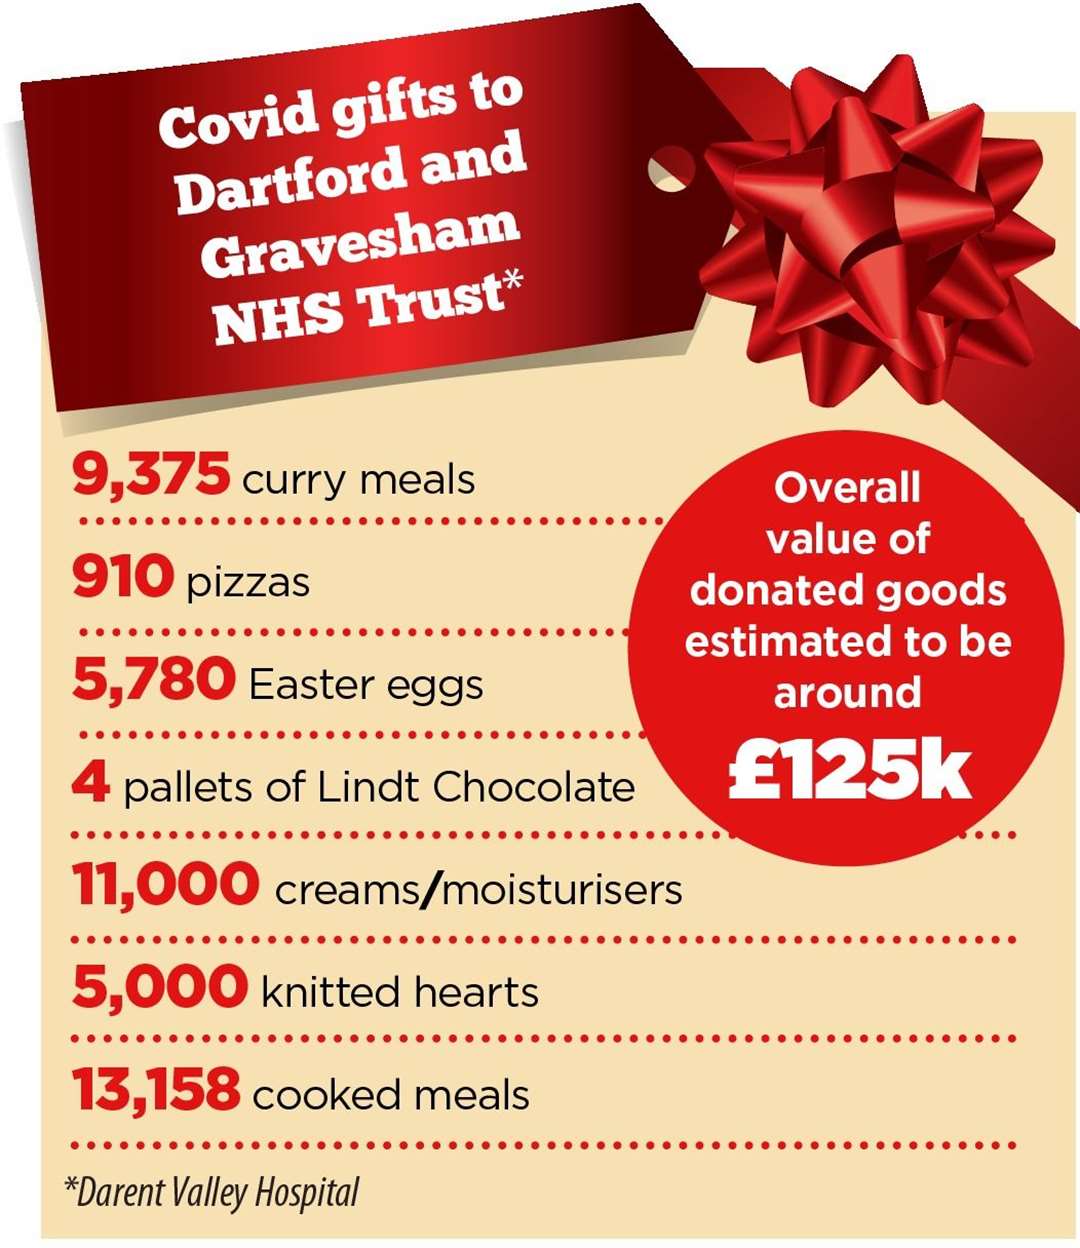 Stats of what the public donated to hospital during the Covid crisis at the Dartford and Gravesham NHS Trust